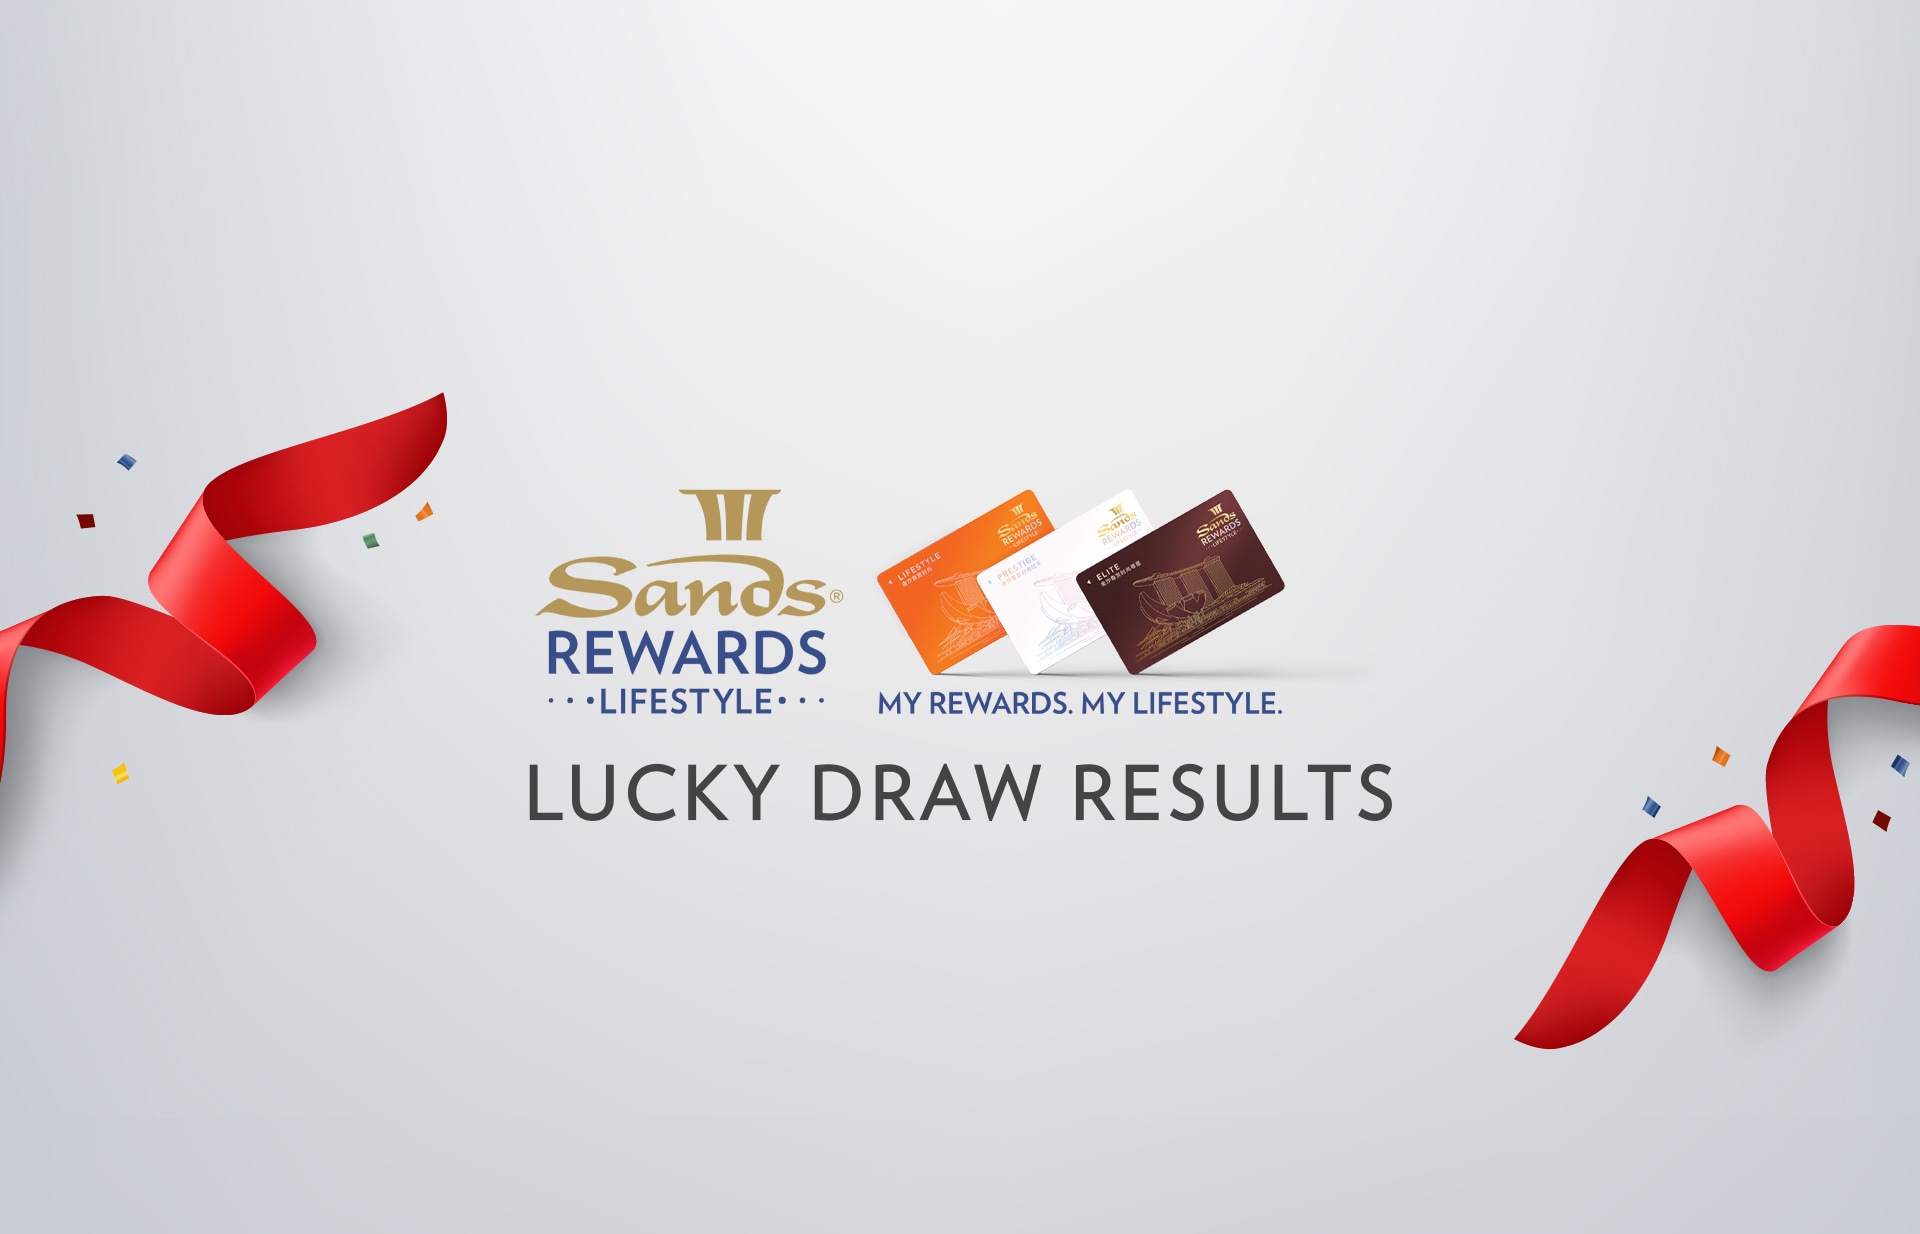 Sands Rewards LifeStyle Lucky Draws Super Lucky Number Marina Bay